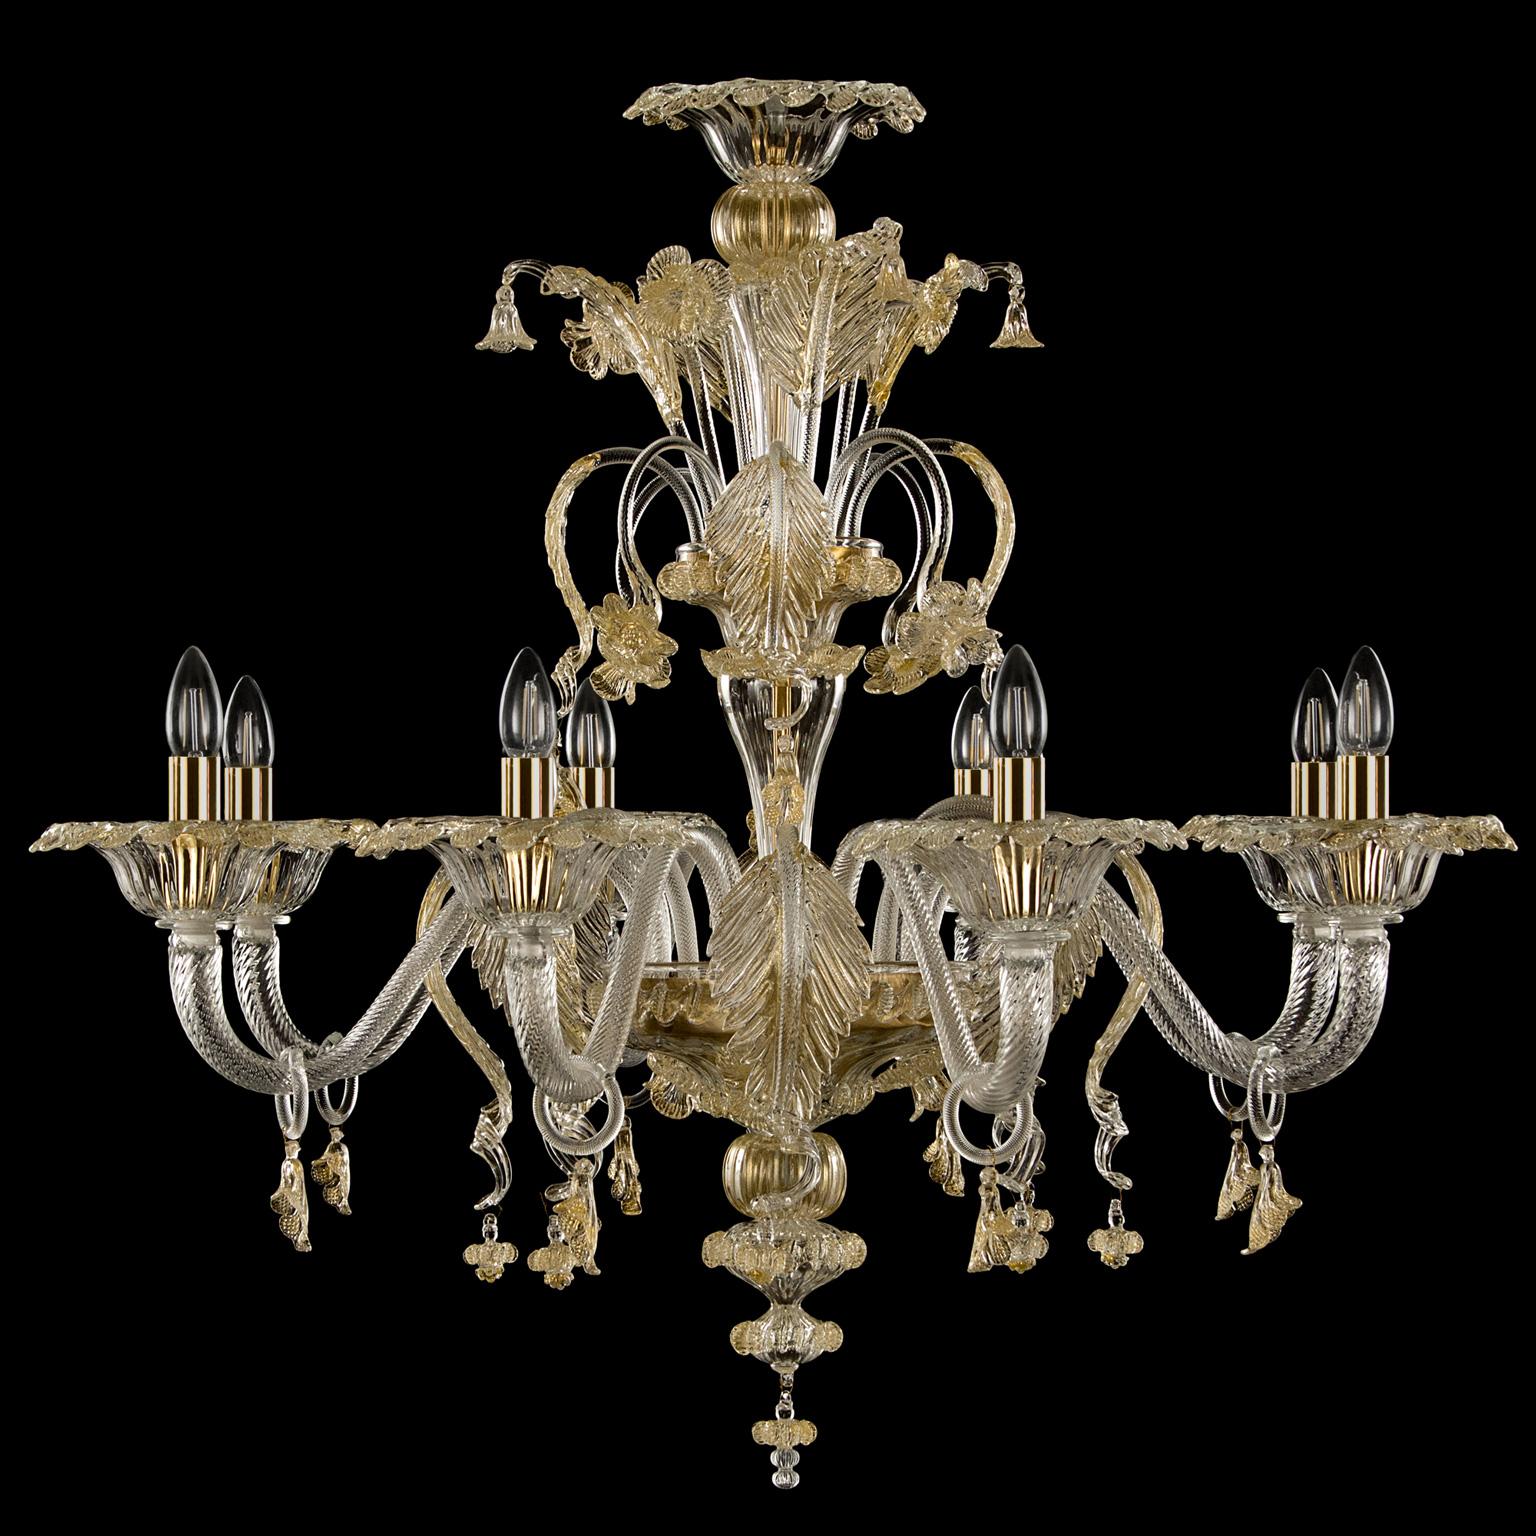 Toffee chandelier 8 arms, semi-rezzonico style, crystal Murano glass, multi-color details by Multiforme.

The artistic glass chandelier toffee is an elegant and delicate lighting work, colored with pastel tones. The structure is a combination of